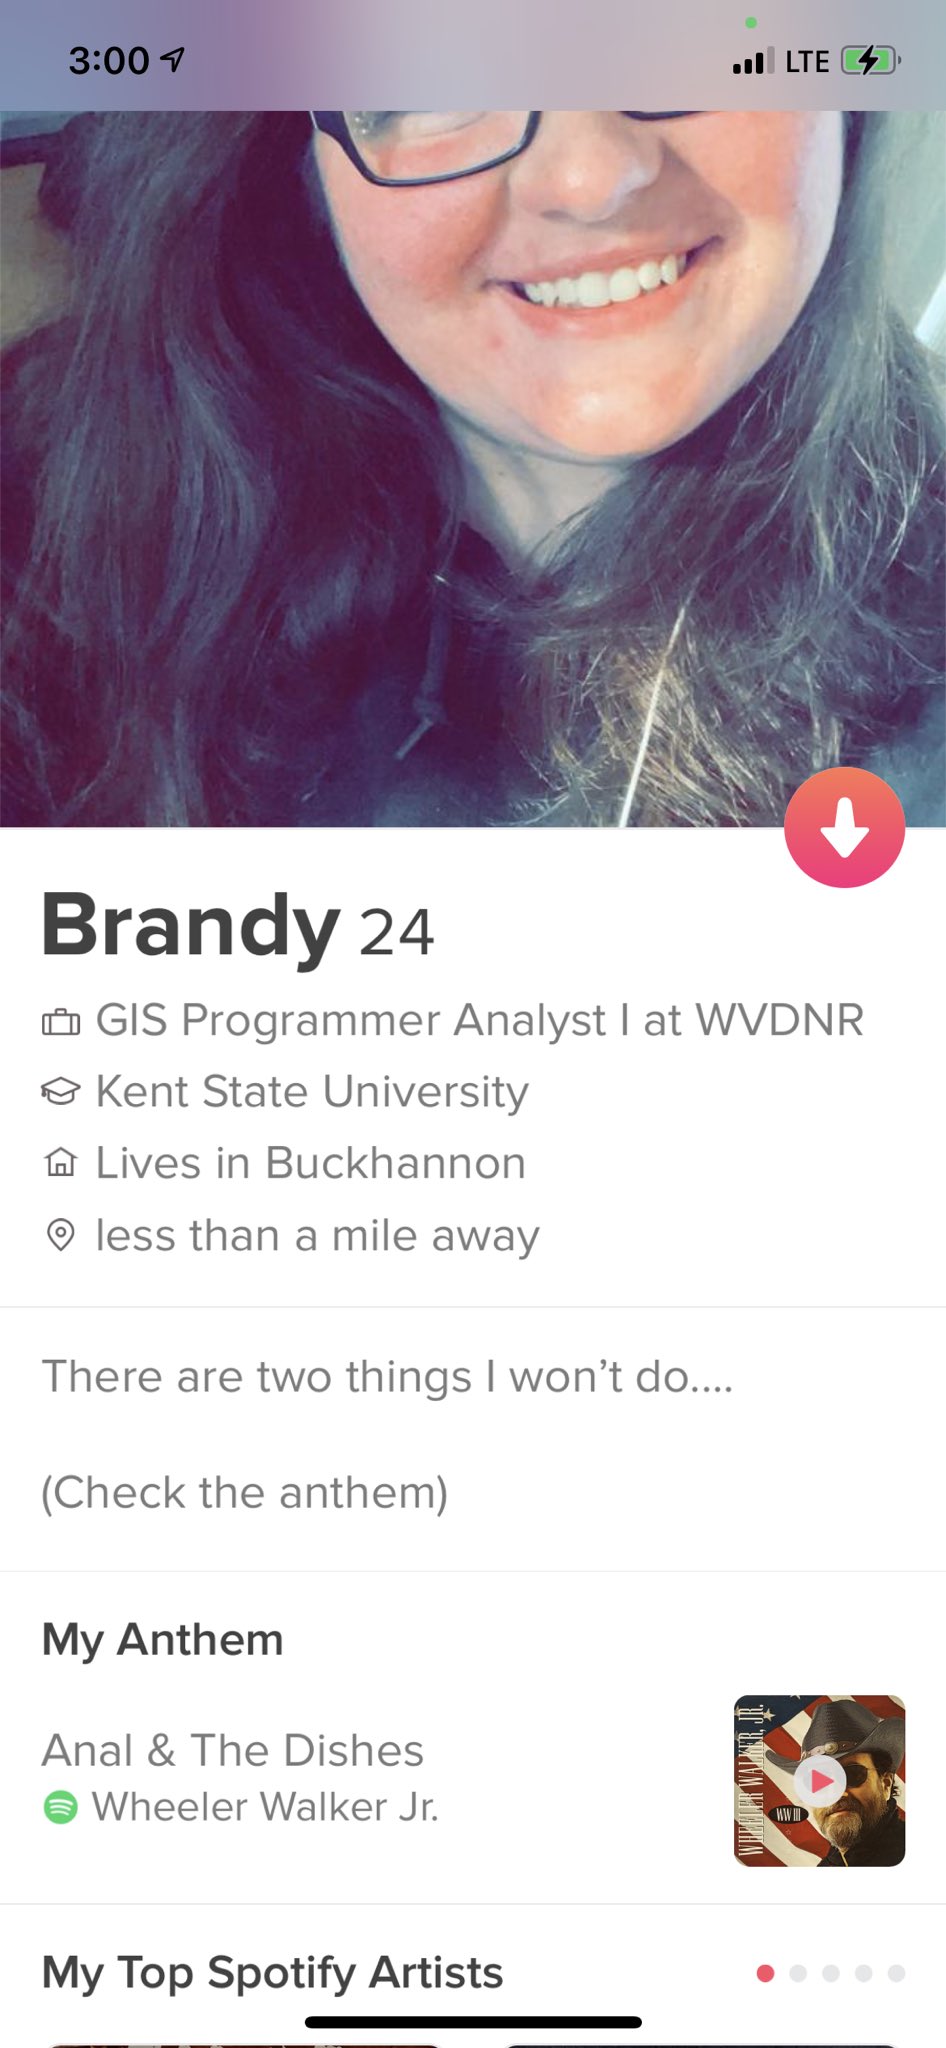 The Best And Worst Tinder Profiles And Conversations In The World #234